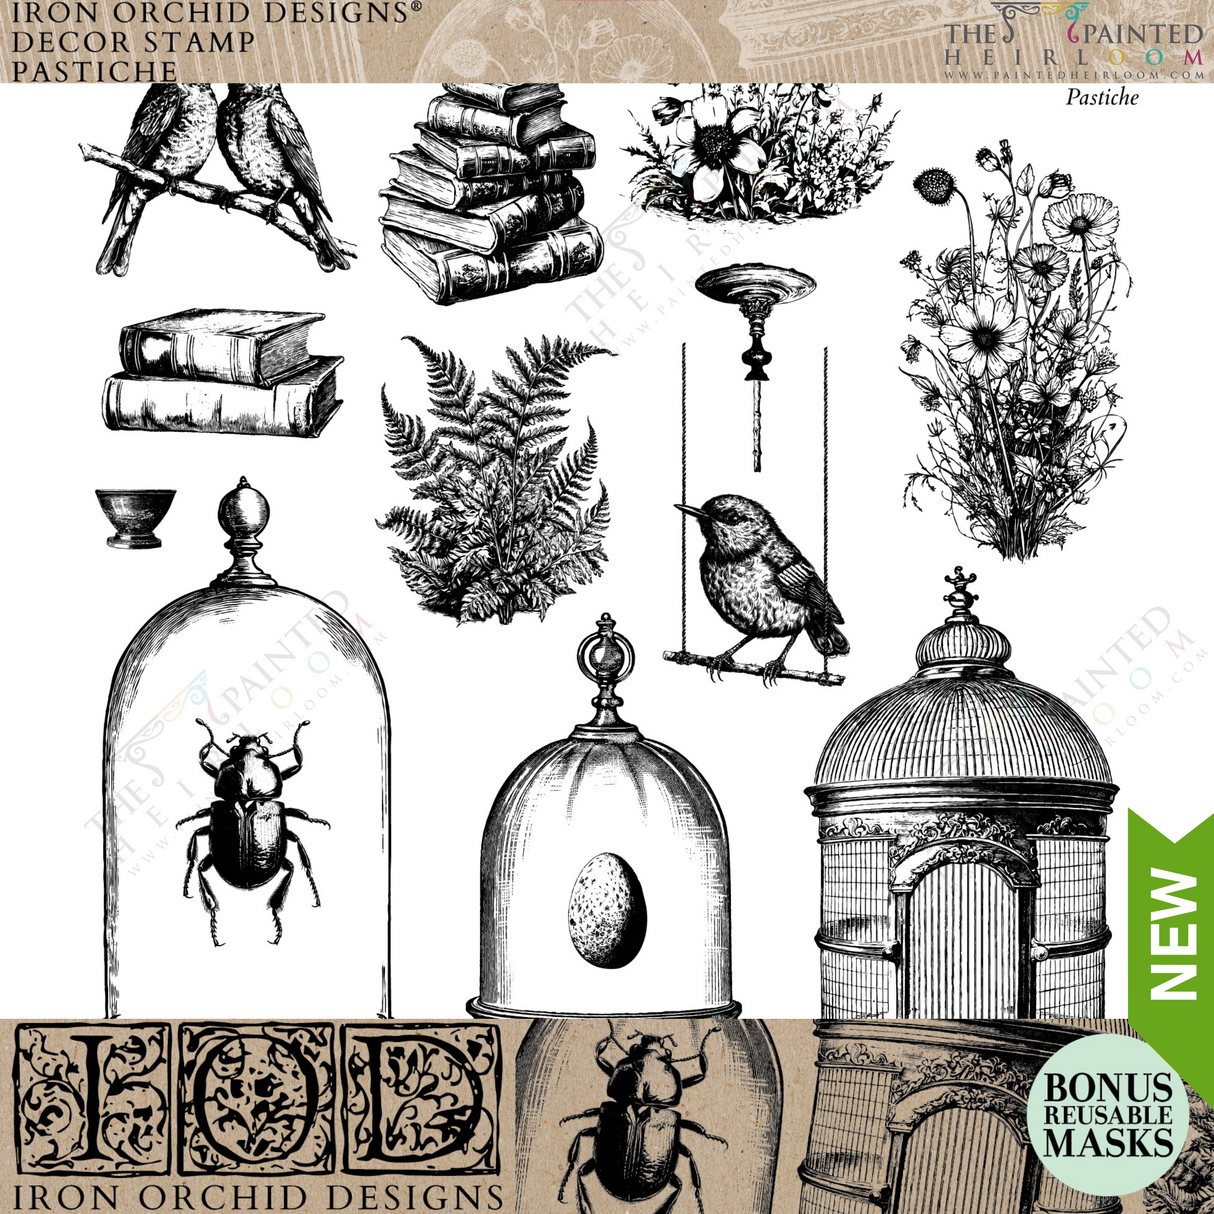 Pastiche Stamp by IOD - Iron Orchid Designs